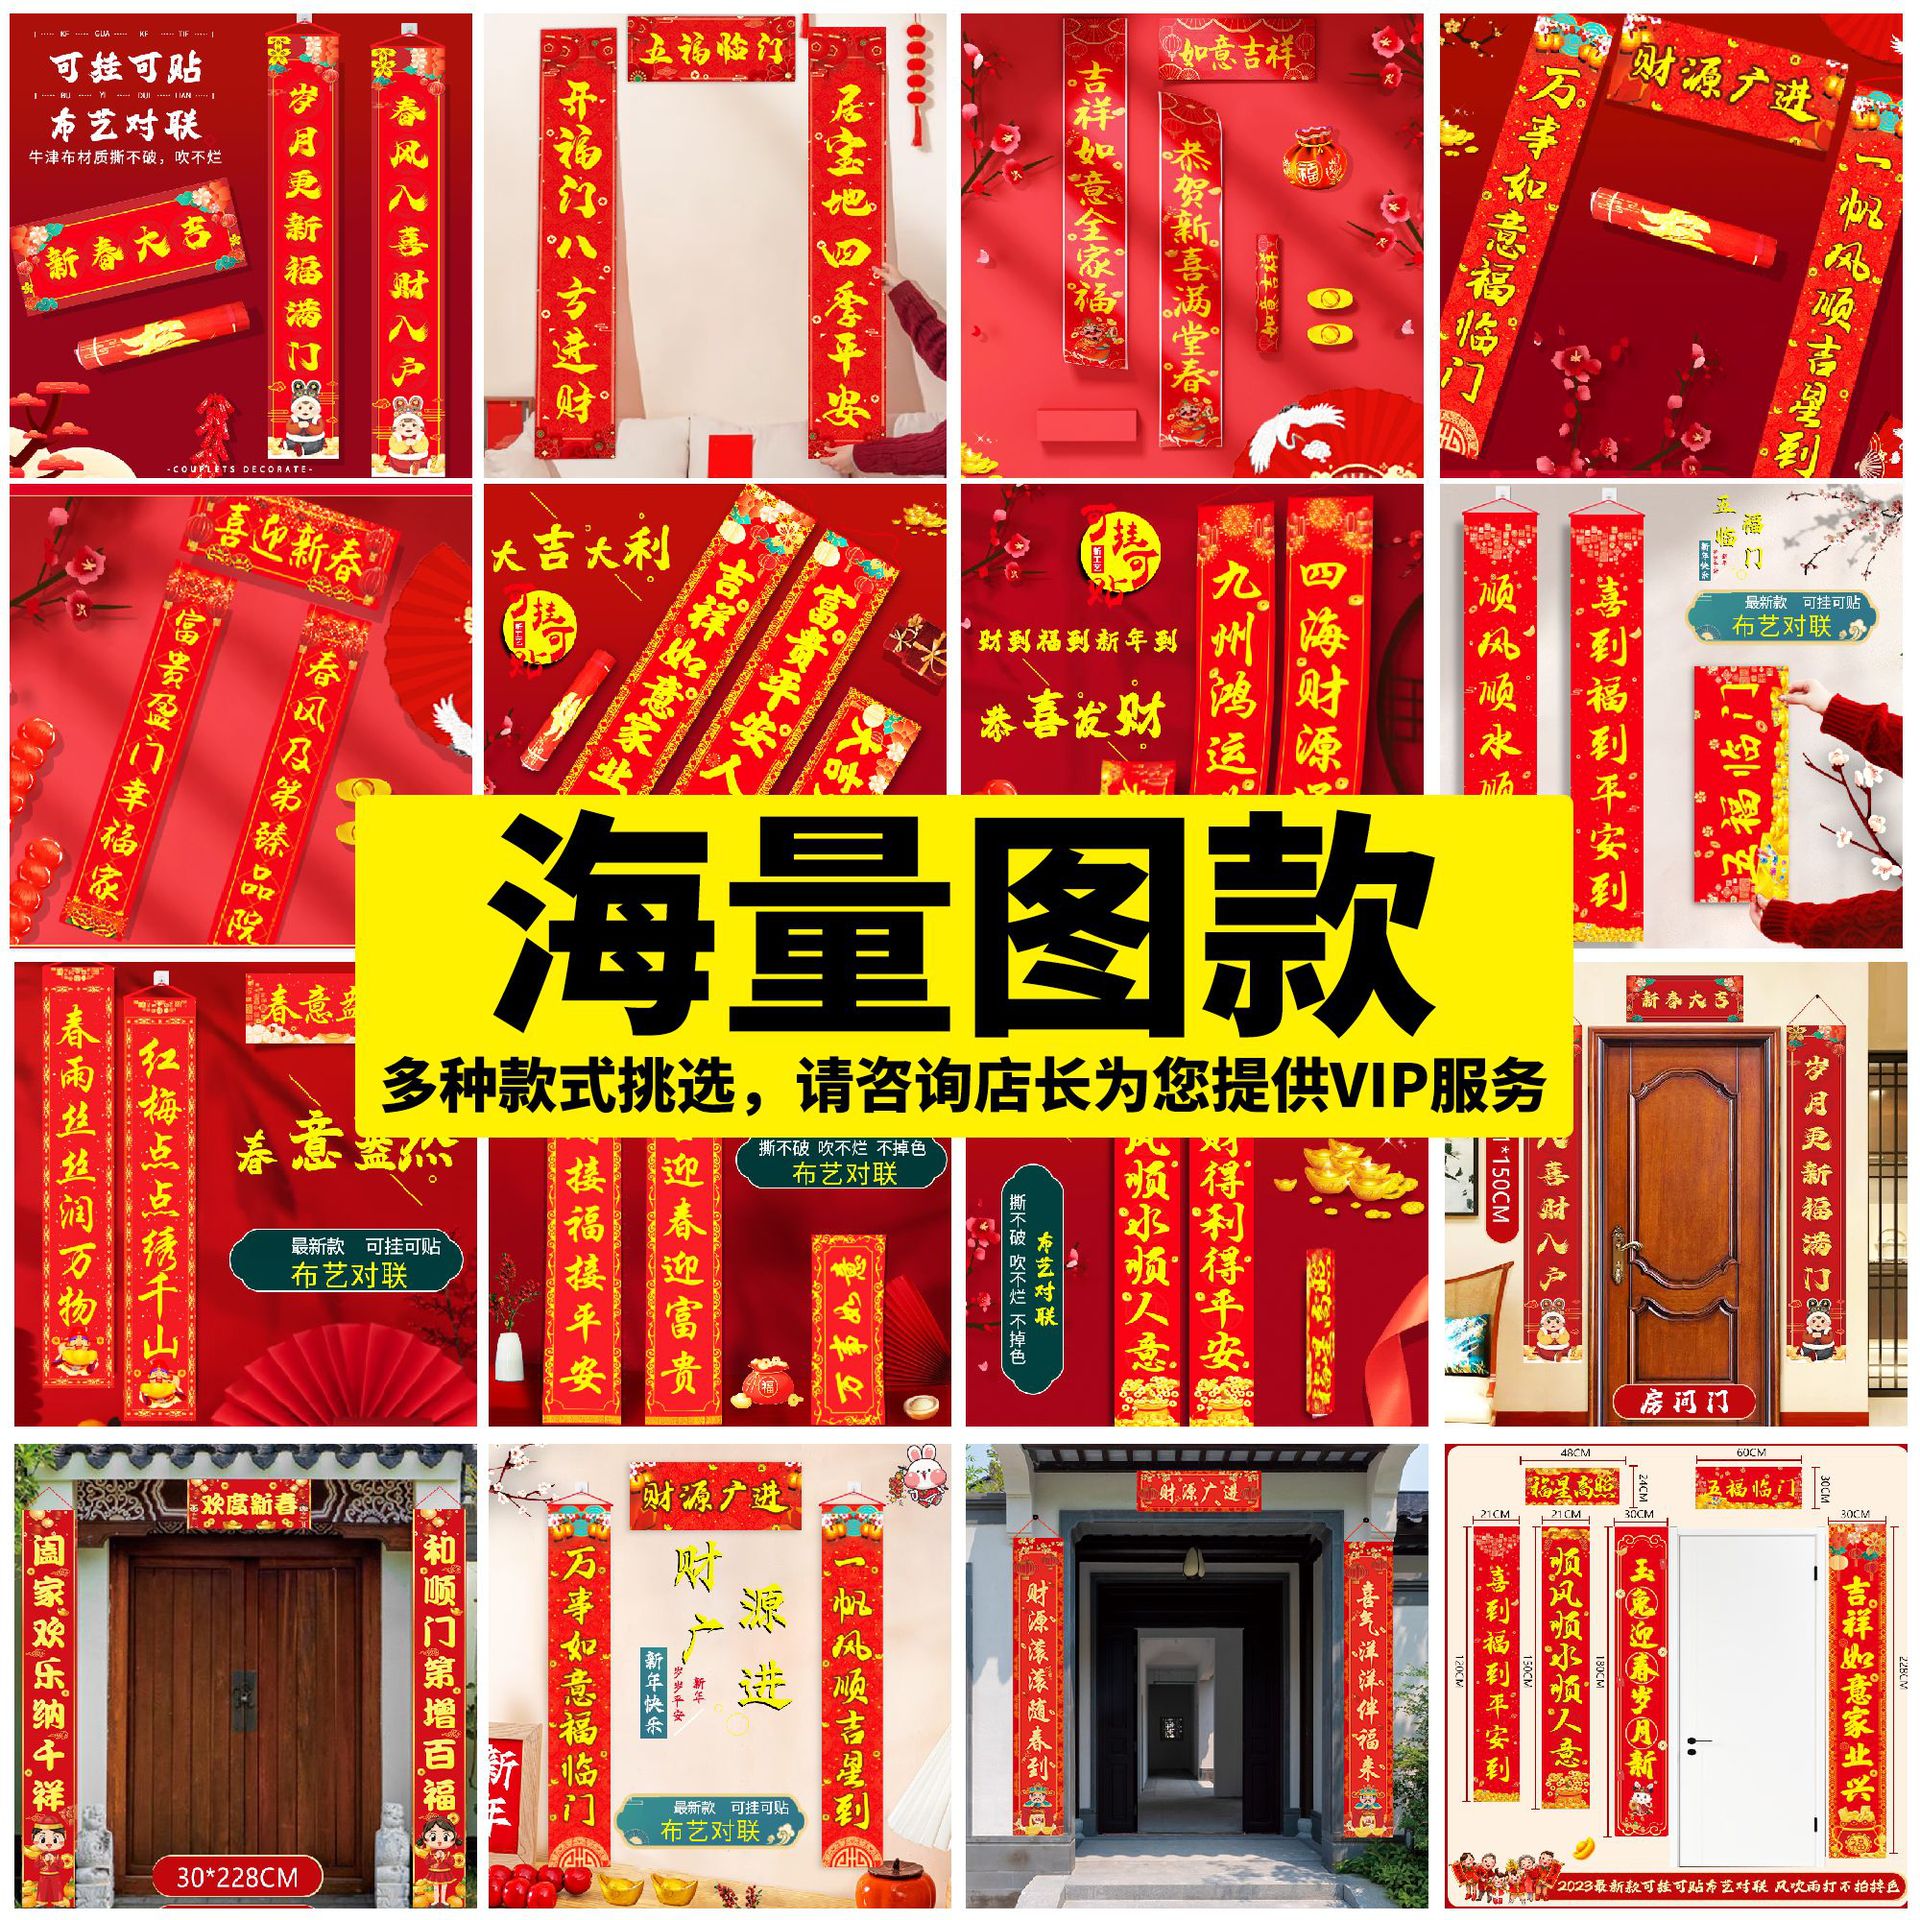 New Year Couplet Layout New Year Couplet Wholesale Door Couplet Wedding Decoration Major Festival New Year Goods Annual Flavor Decoration